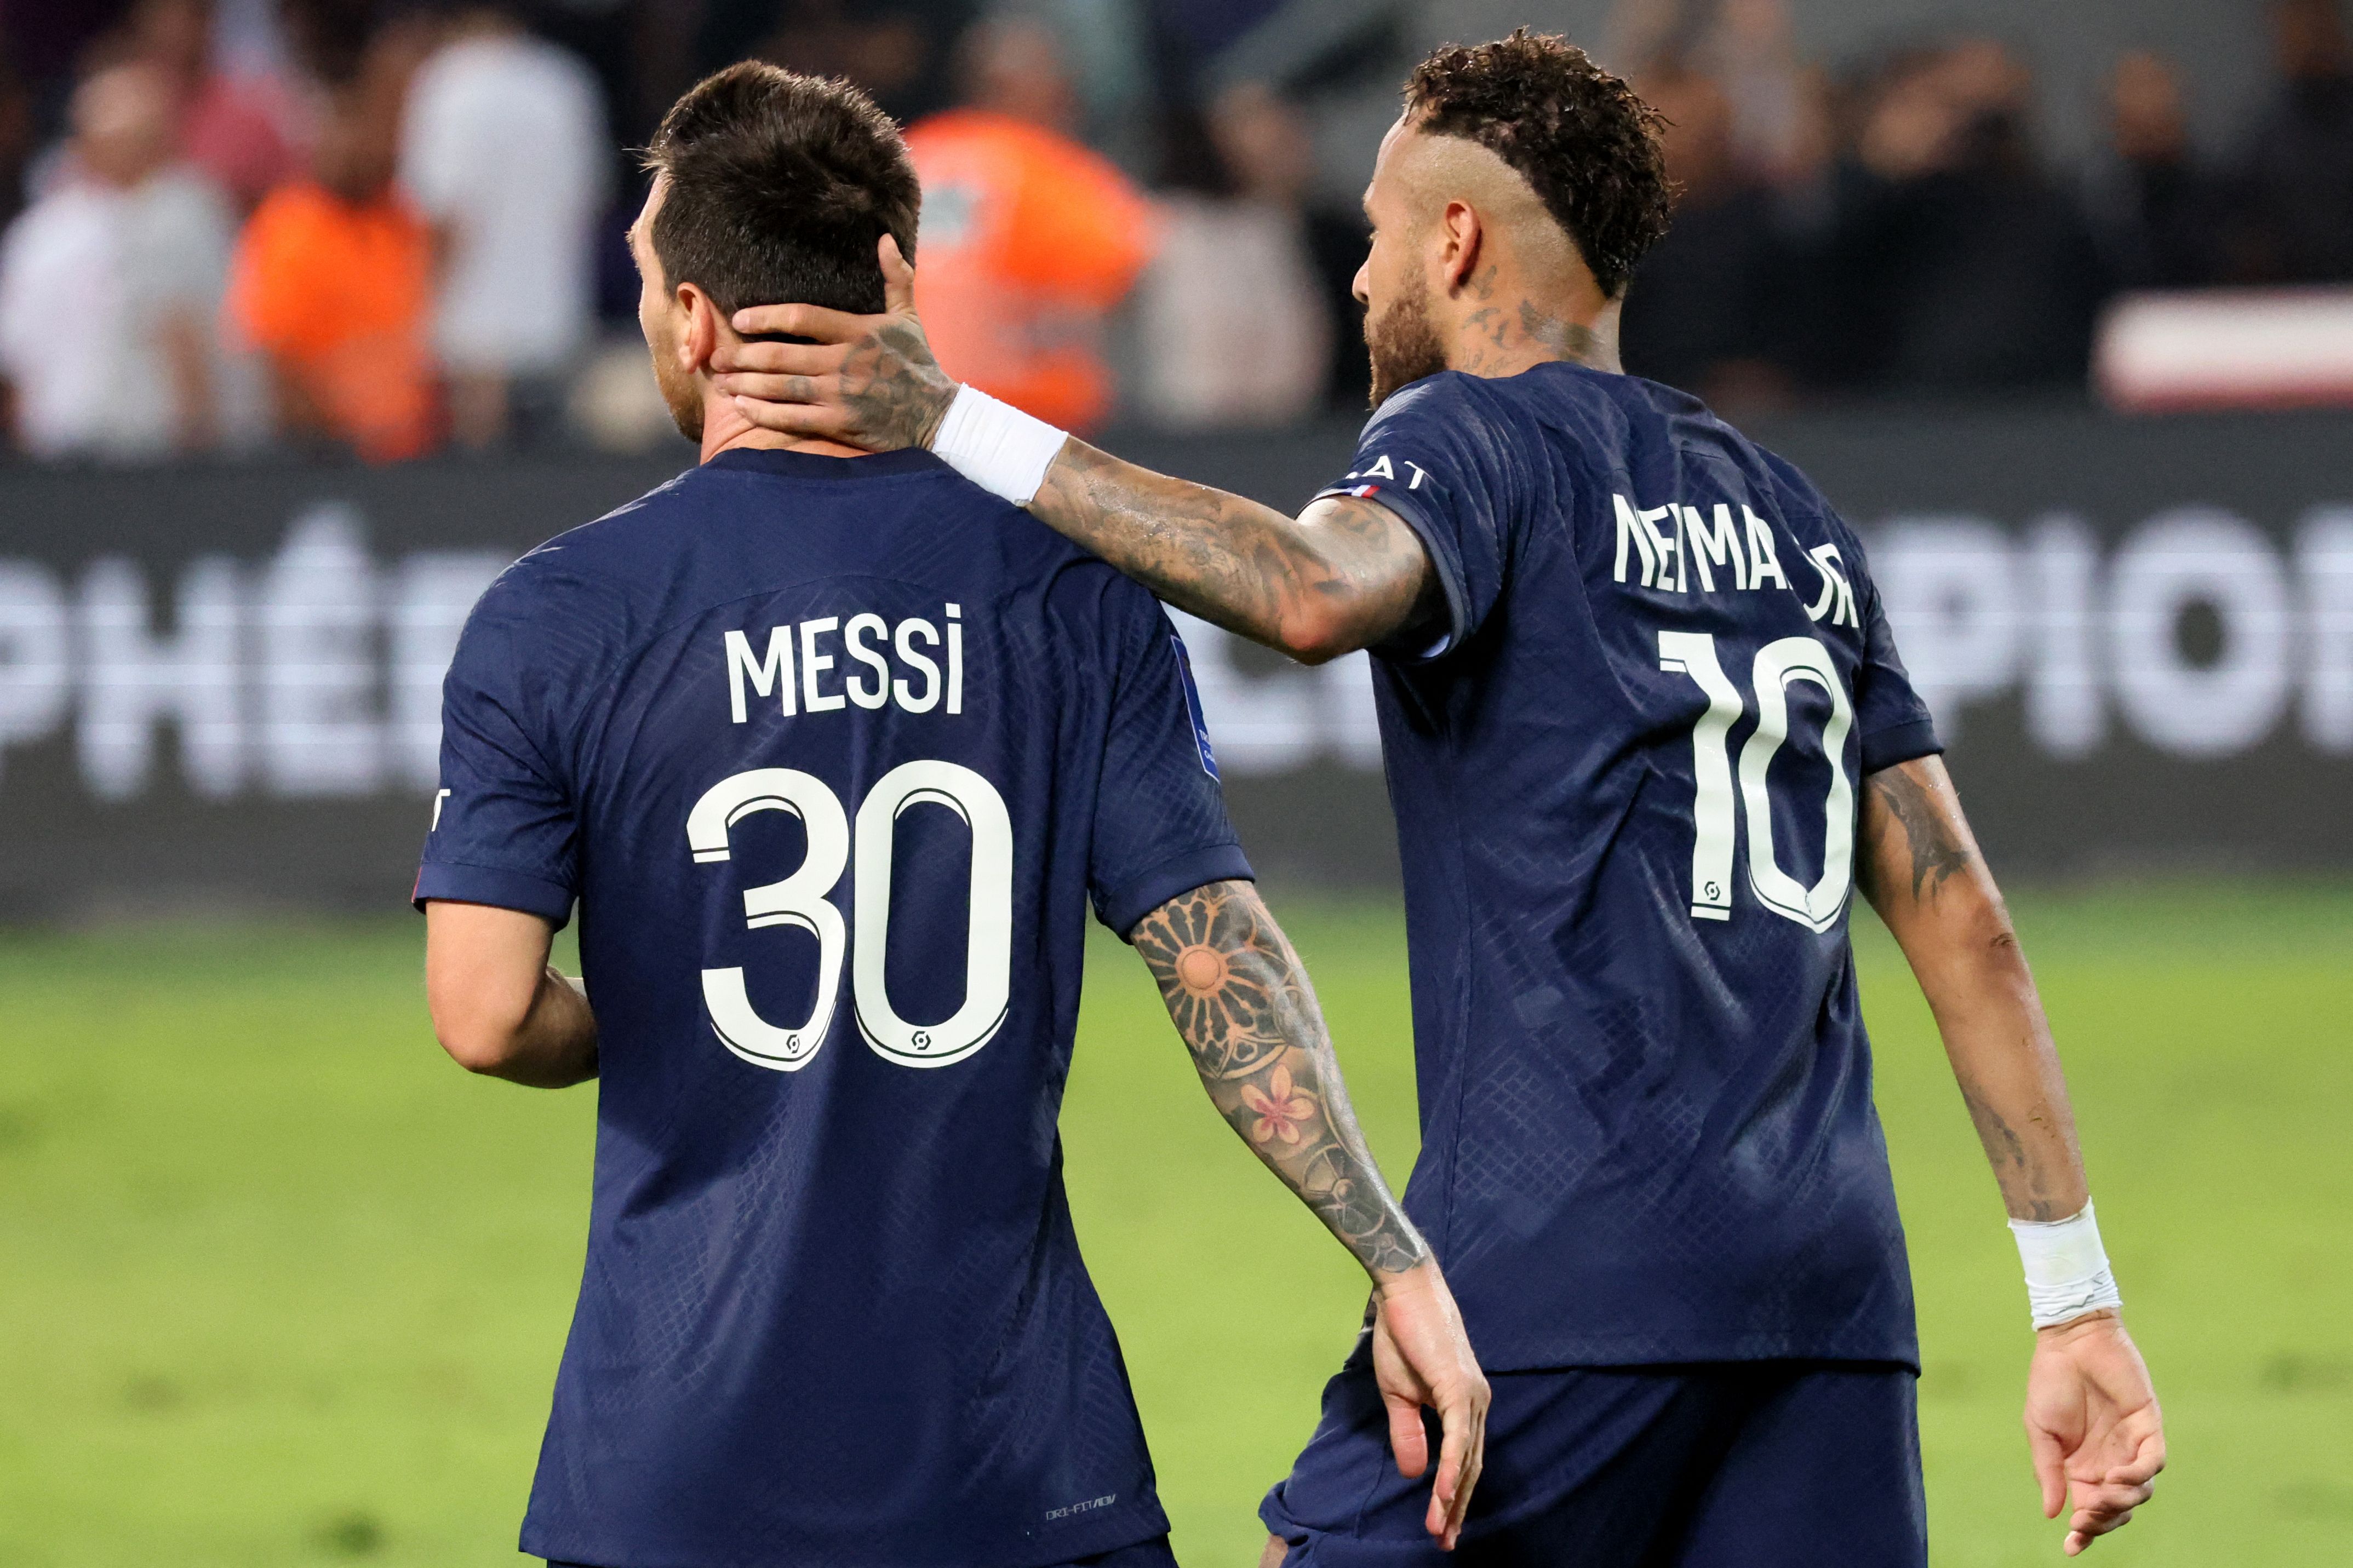 Report: Messi, Neymar and Mbappe's Wages for 2022-2023 Season at PSG - PSG Talk